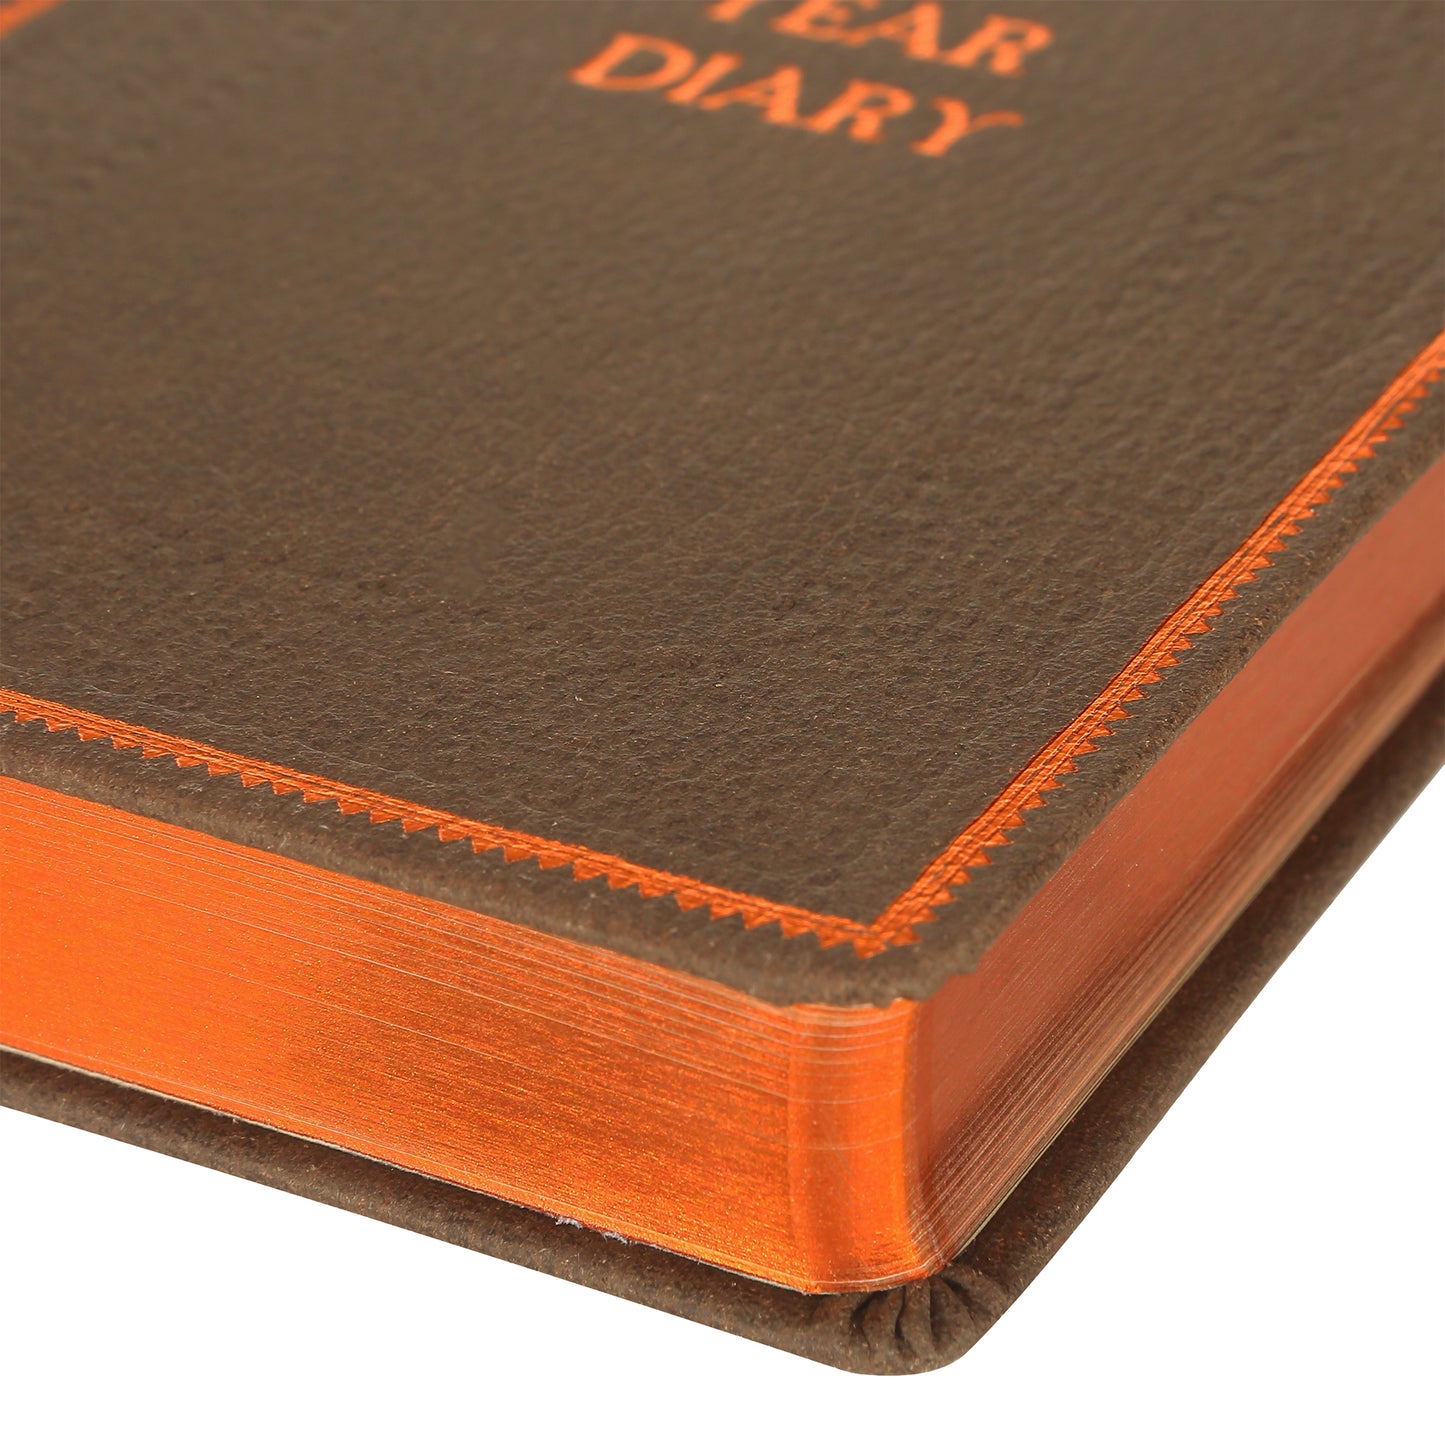 A Line a Day - 5 Year Recycled Leather Diary, Vintage Looking for Girls, Women and Men, 4.64x6.6" 394p. (Dark Brown)